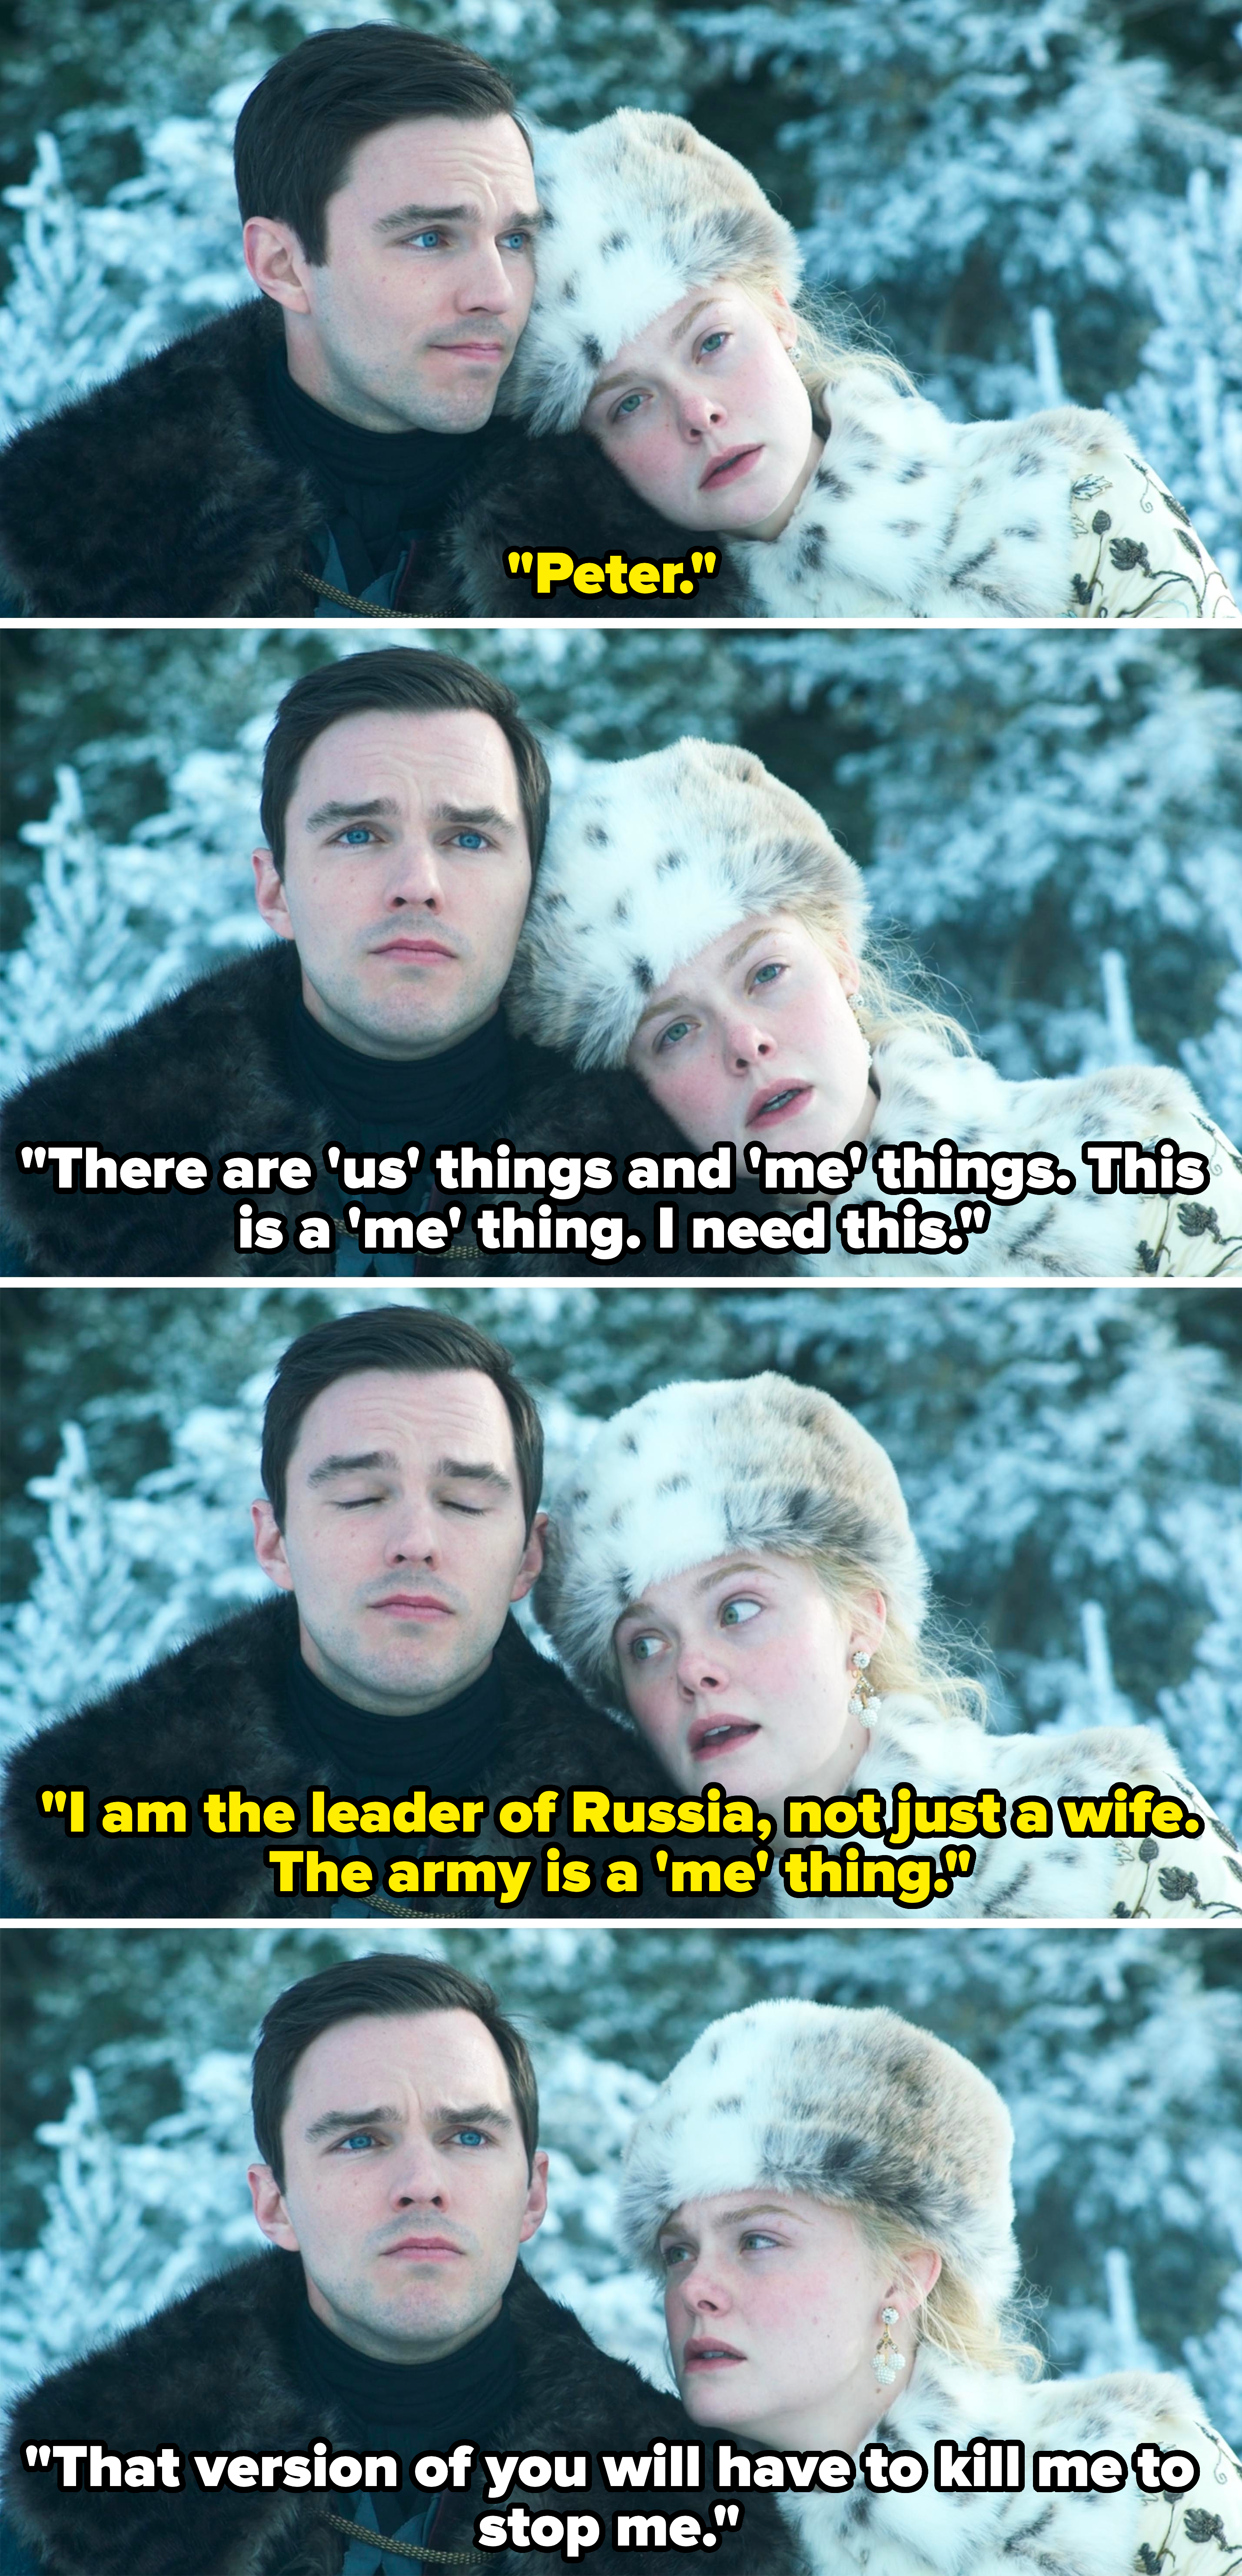 she says, i am the leader of russia not just a wife, the army is a me thing and he says, that version of you will have to kill me to stop me